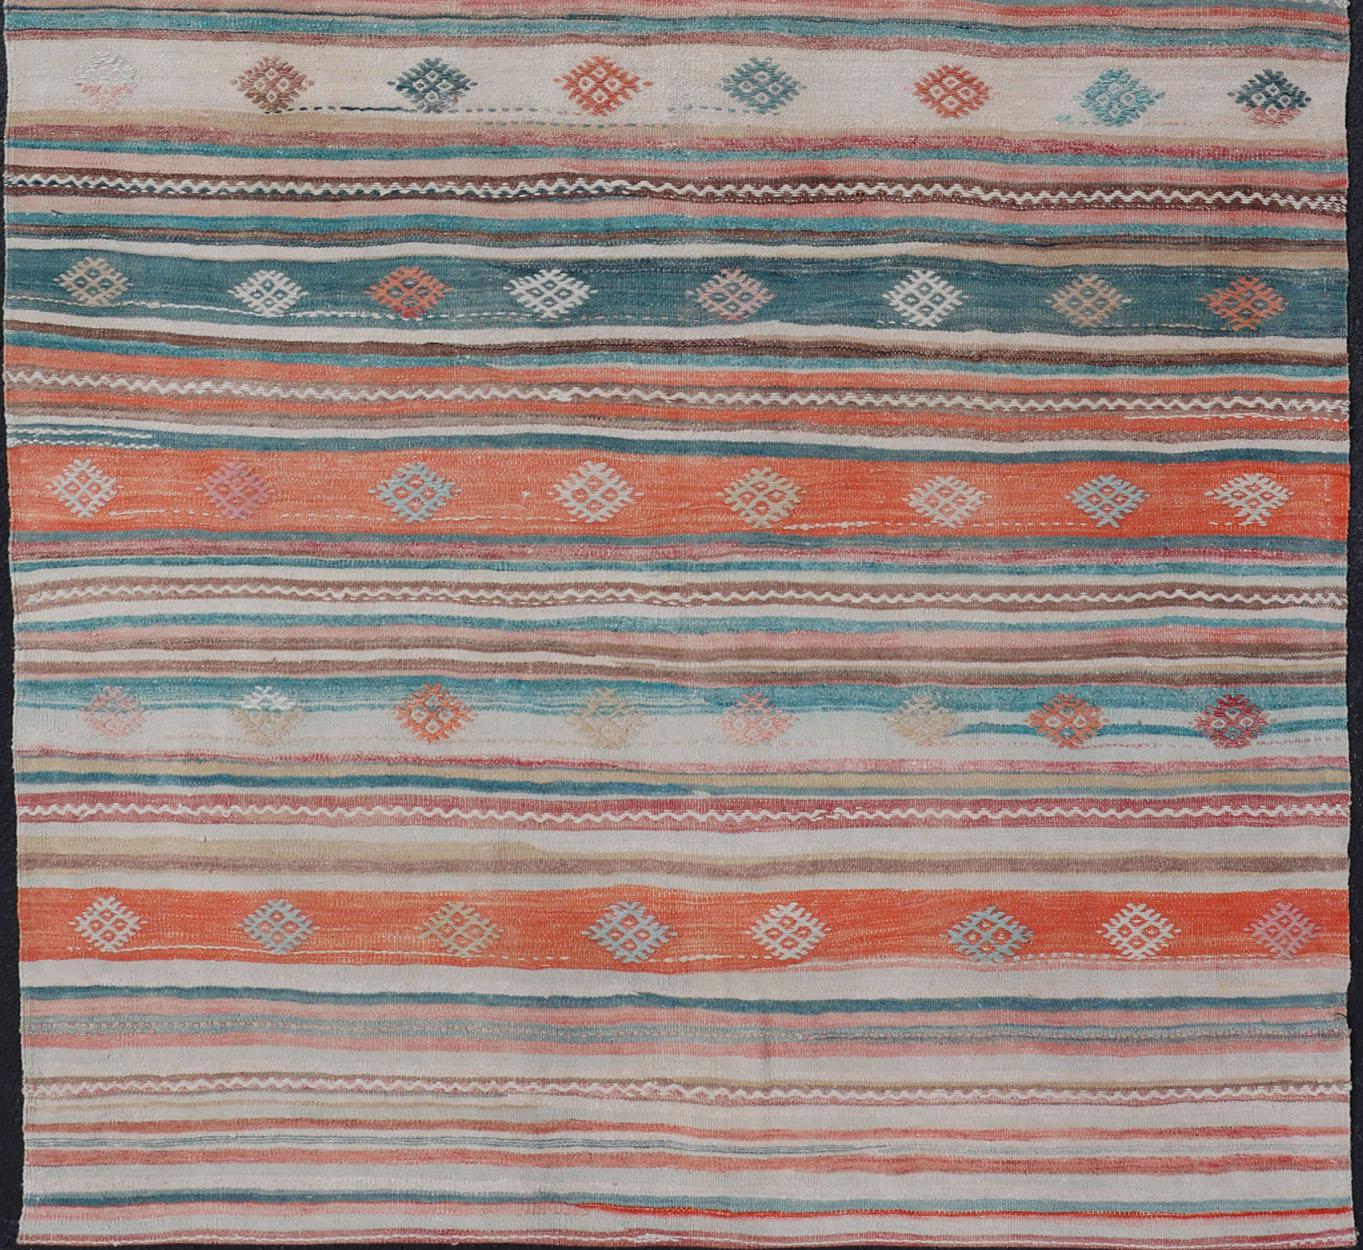 Colorful Vintage Turkish Embroidered Kilim with Stripes and Geometric Motifs For Sale 4